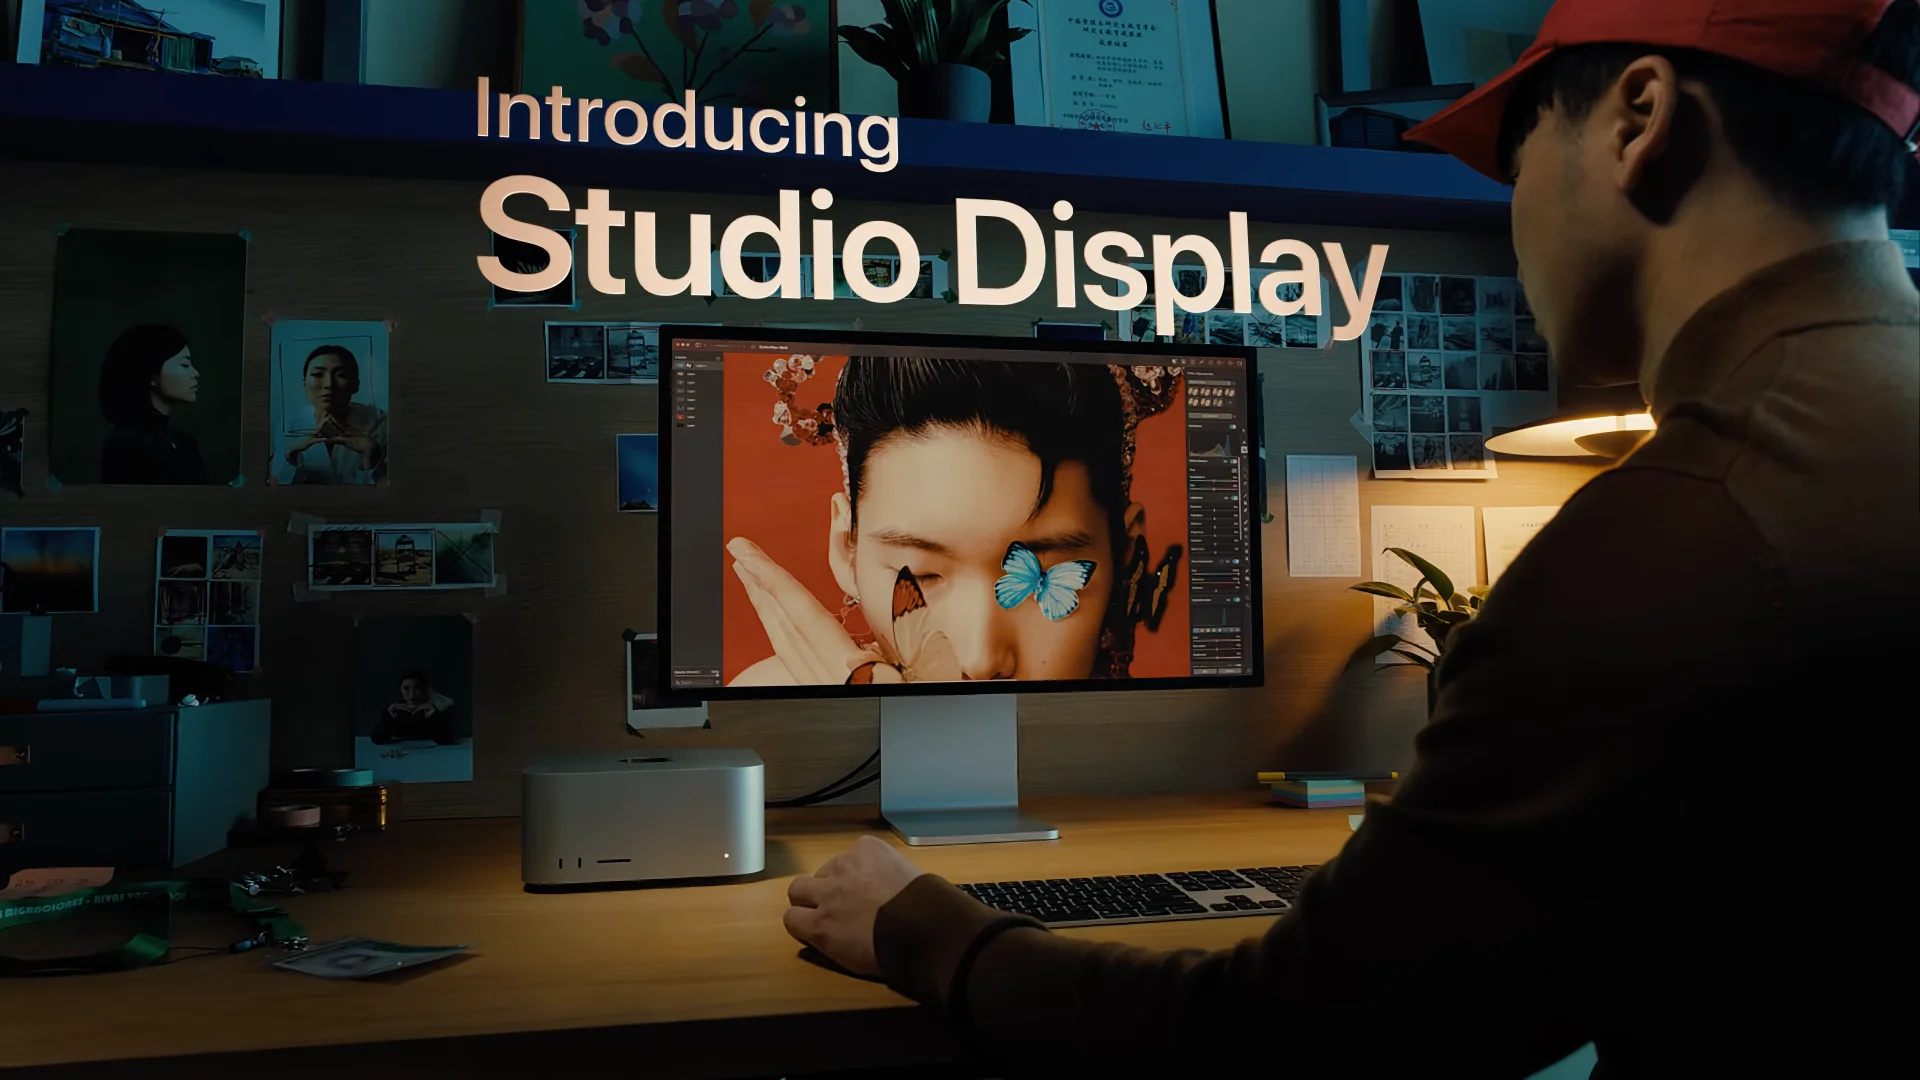 A still image from Apple's commercial for the Studio Display showcasing a creative professional editing an illustration on their Mac Studio and Studio Display, with the tagline "Introducing Studio Display" displayed near the top of the image